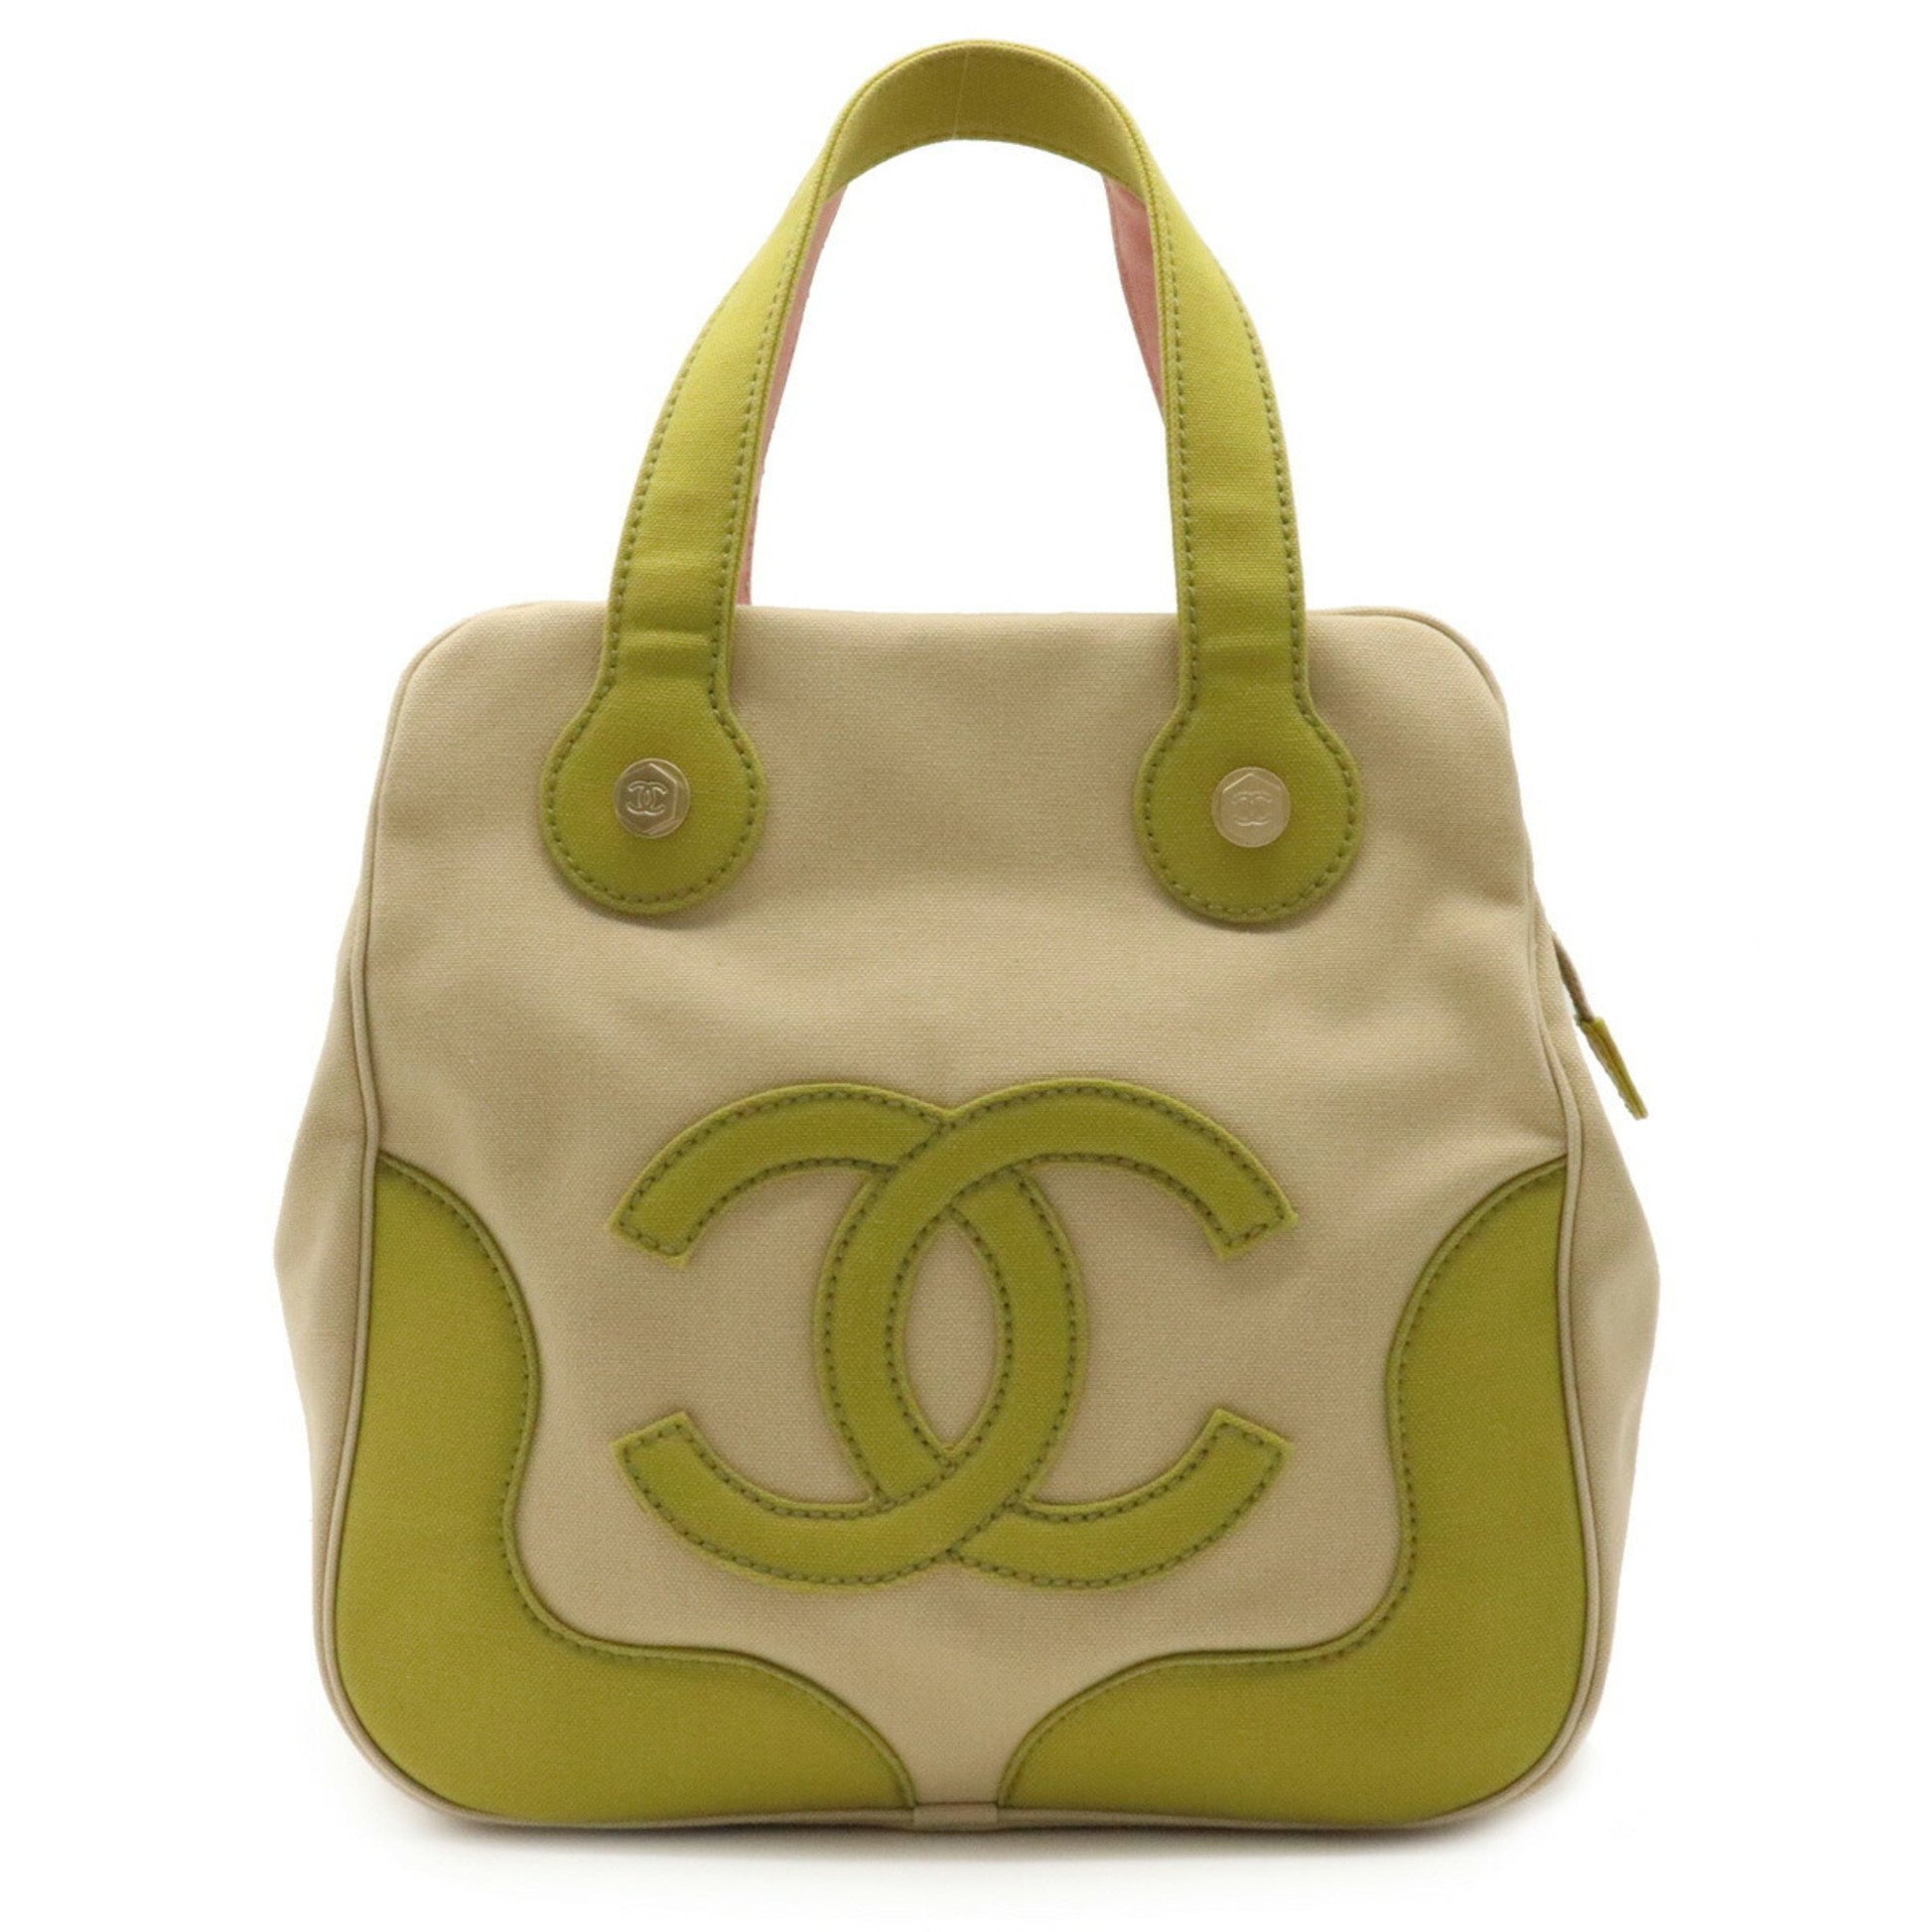 Chanel Marshmallow Tote Bag Beige